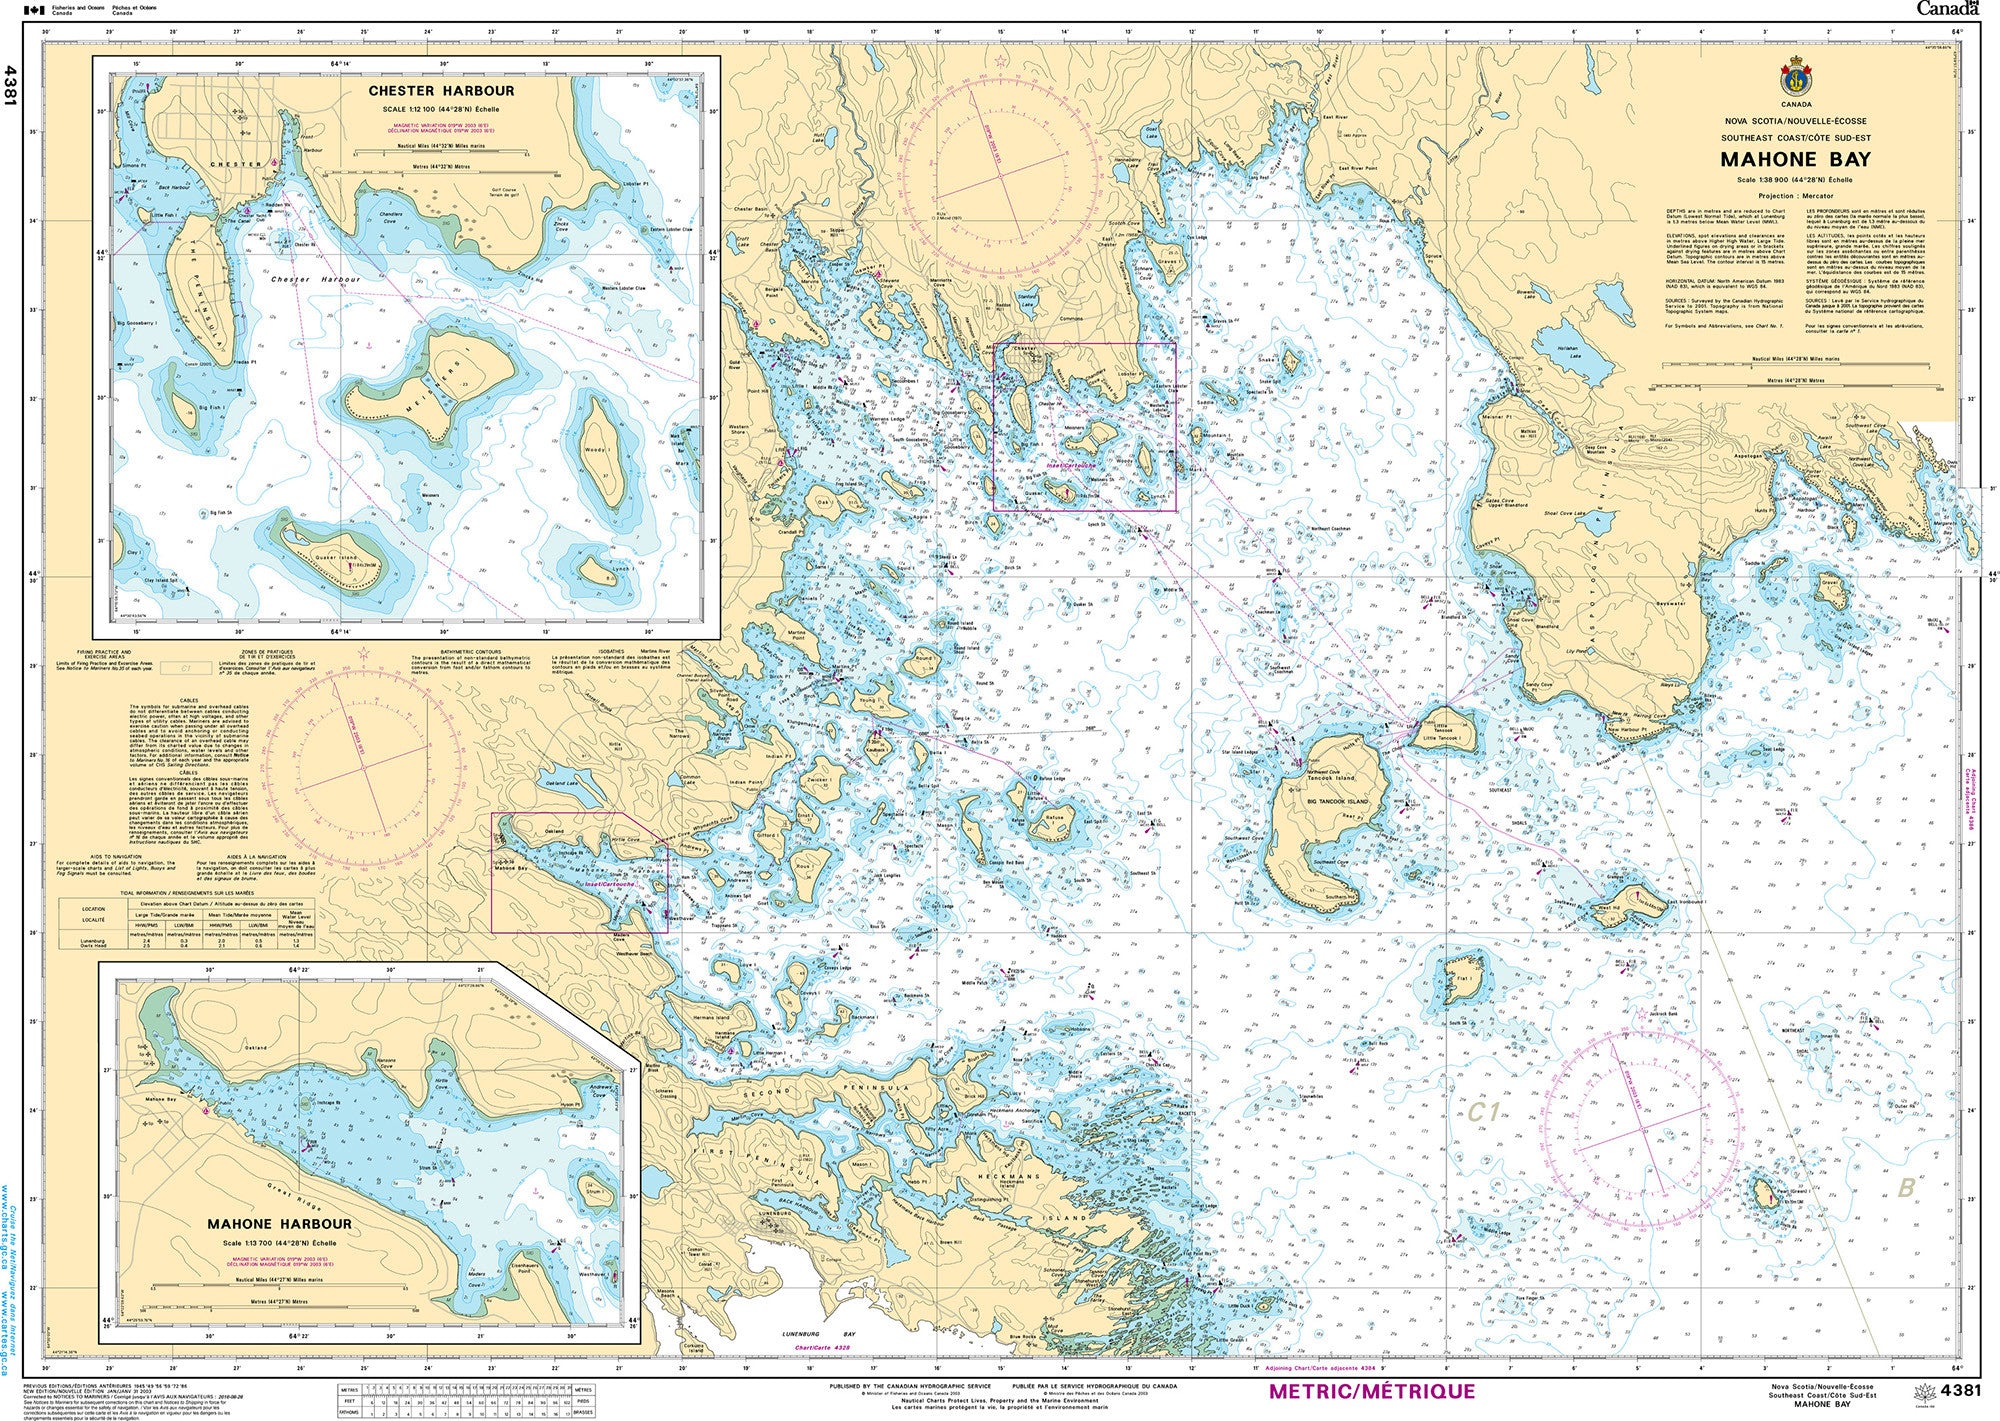 Canadian Hydrographic Service Nautical Chart CHS4381: Mahone Bay